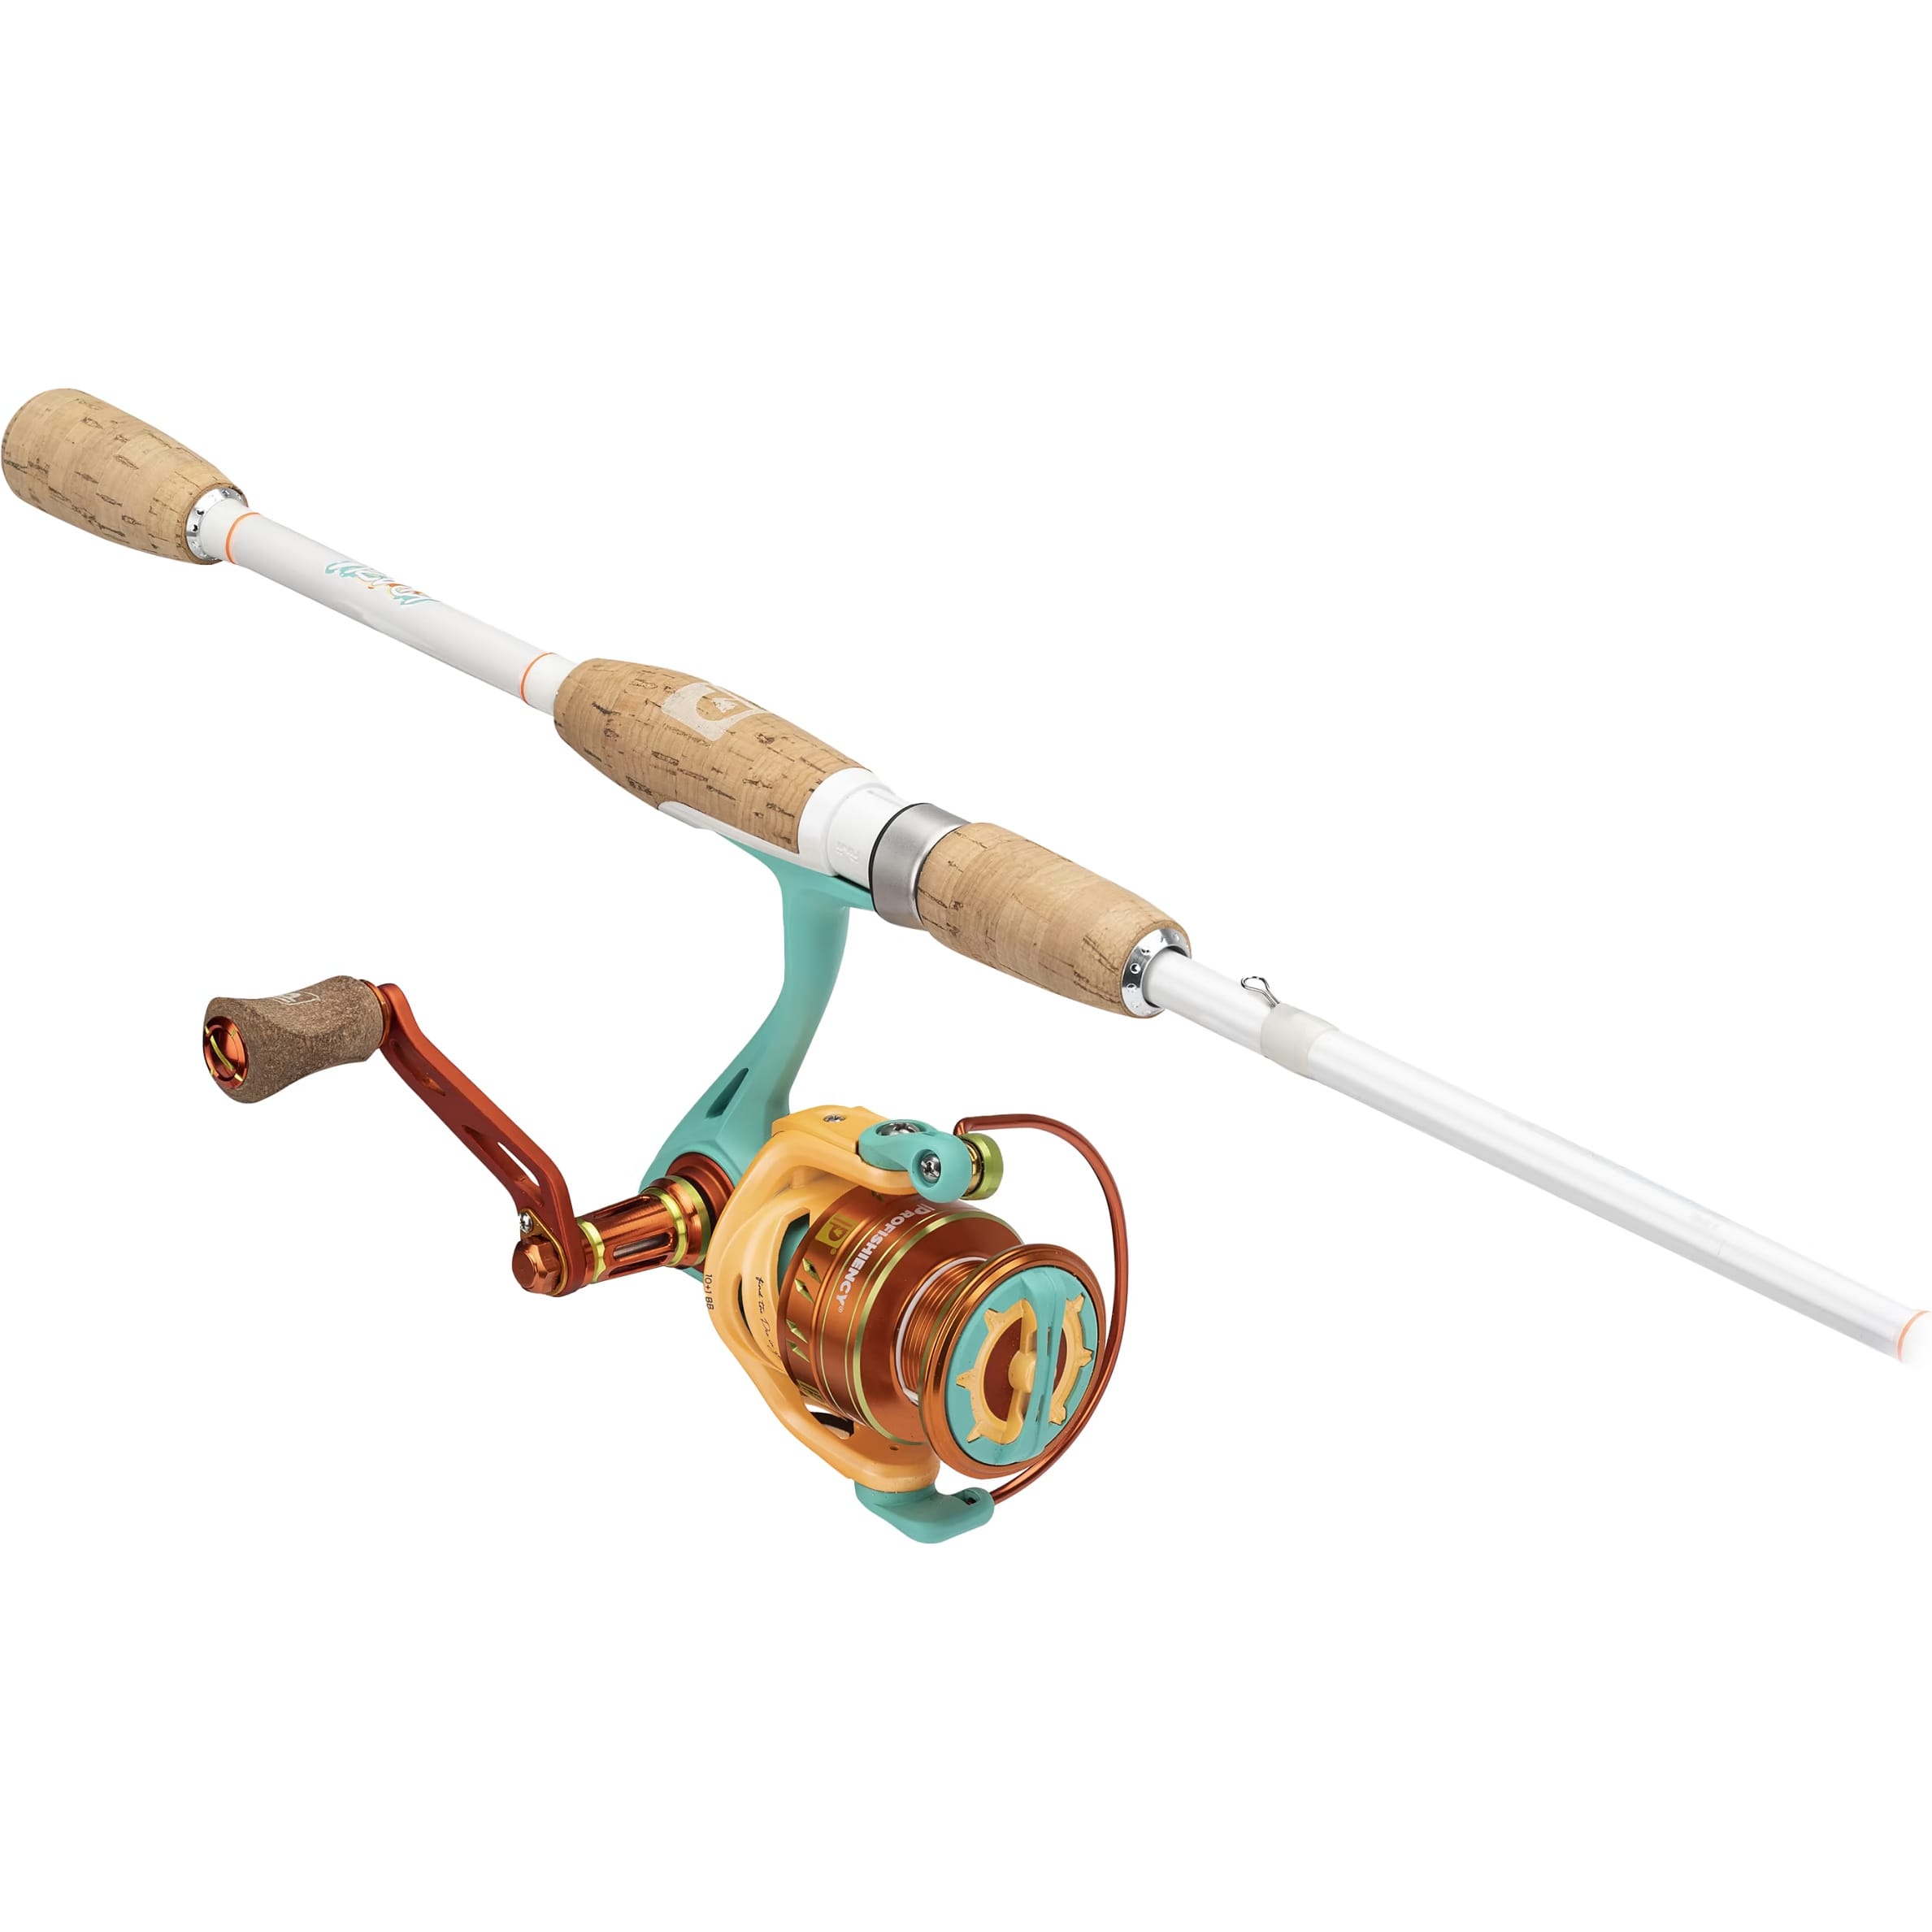 ProFISHiency Krazy 3 Spinning 7 ft Rod and Reel Combo